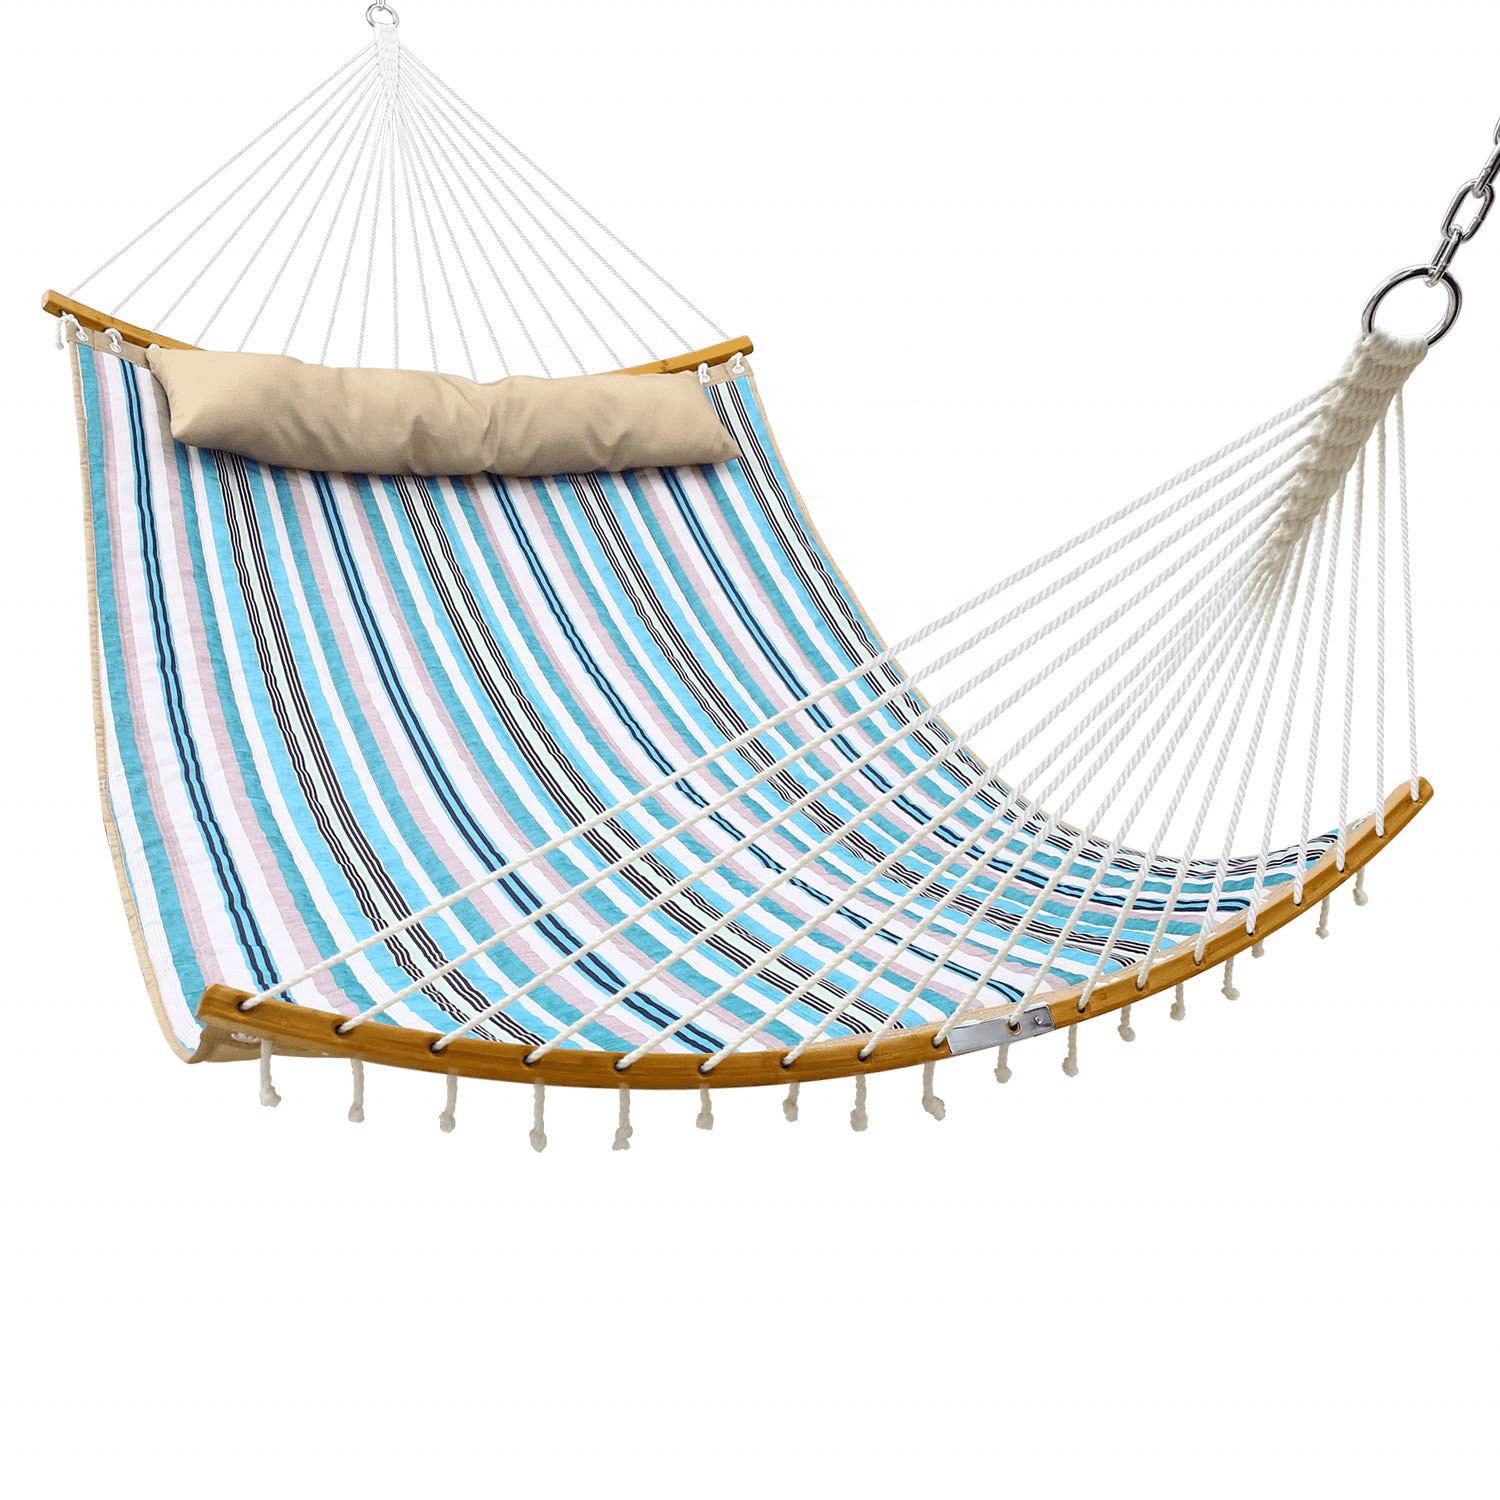 Wholesale Price China Hanging Rope Chair Swing - Curved Folding Bar Portable Hammock with Pillow and Carry Bag Hammock Swing 	Quilted hammock – Top Asian